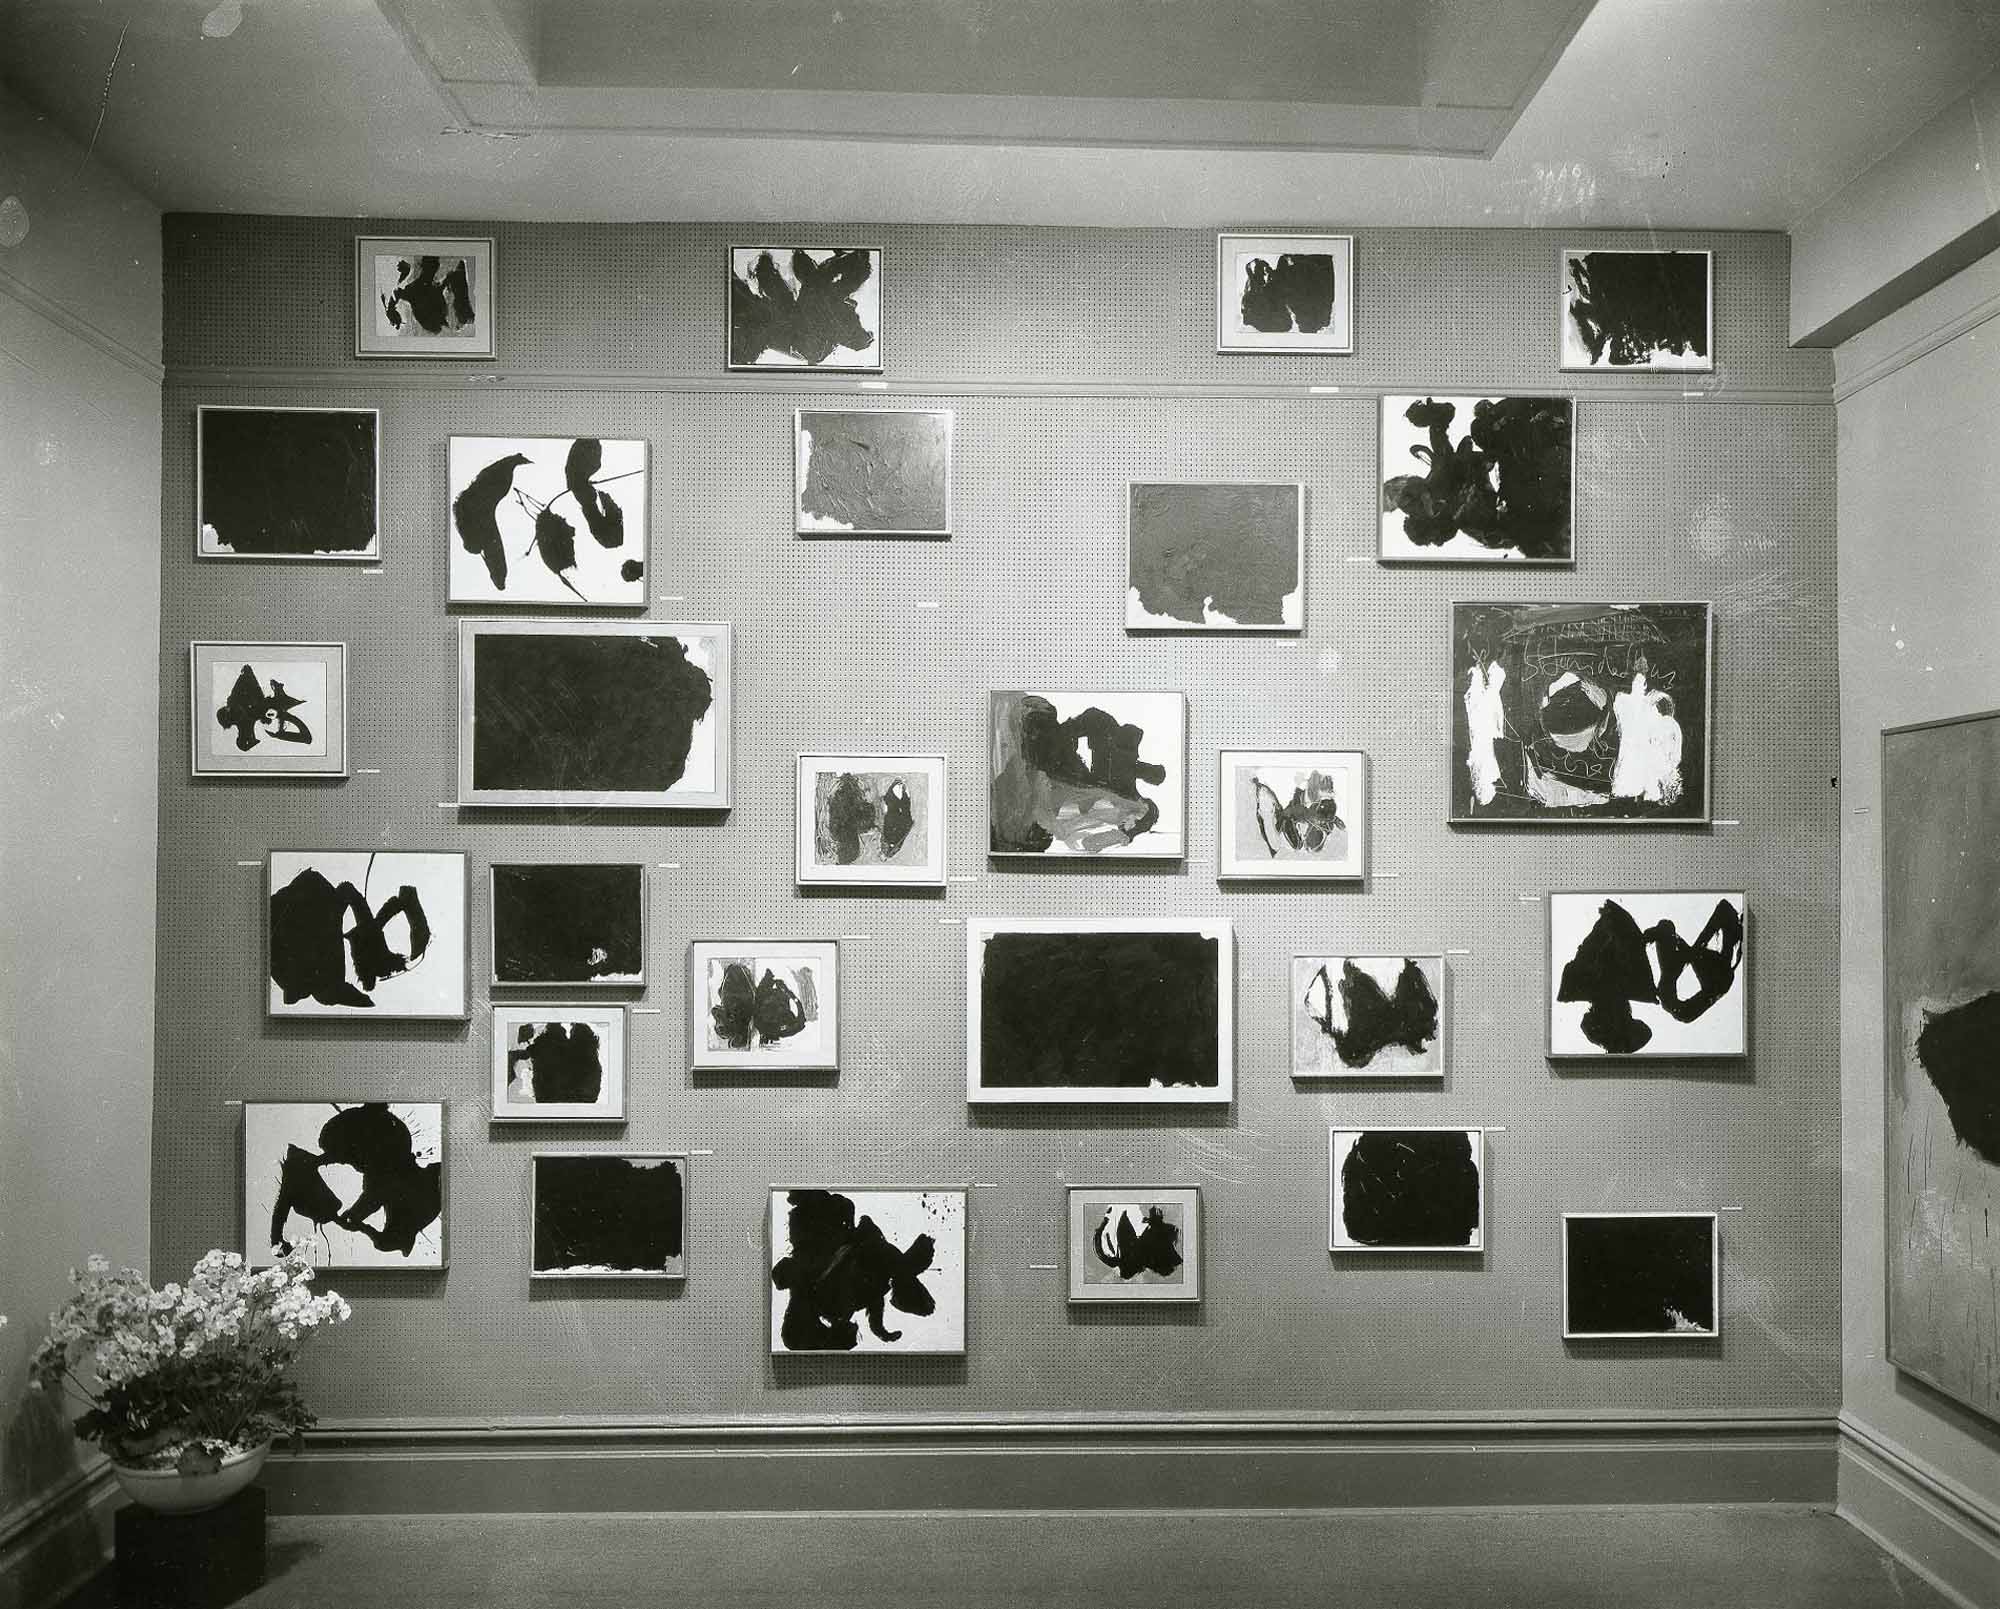 Twenty eight small works by Motherwell are displayed on a wall at Sidney Janis Gallery, 1959.